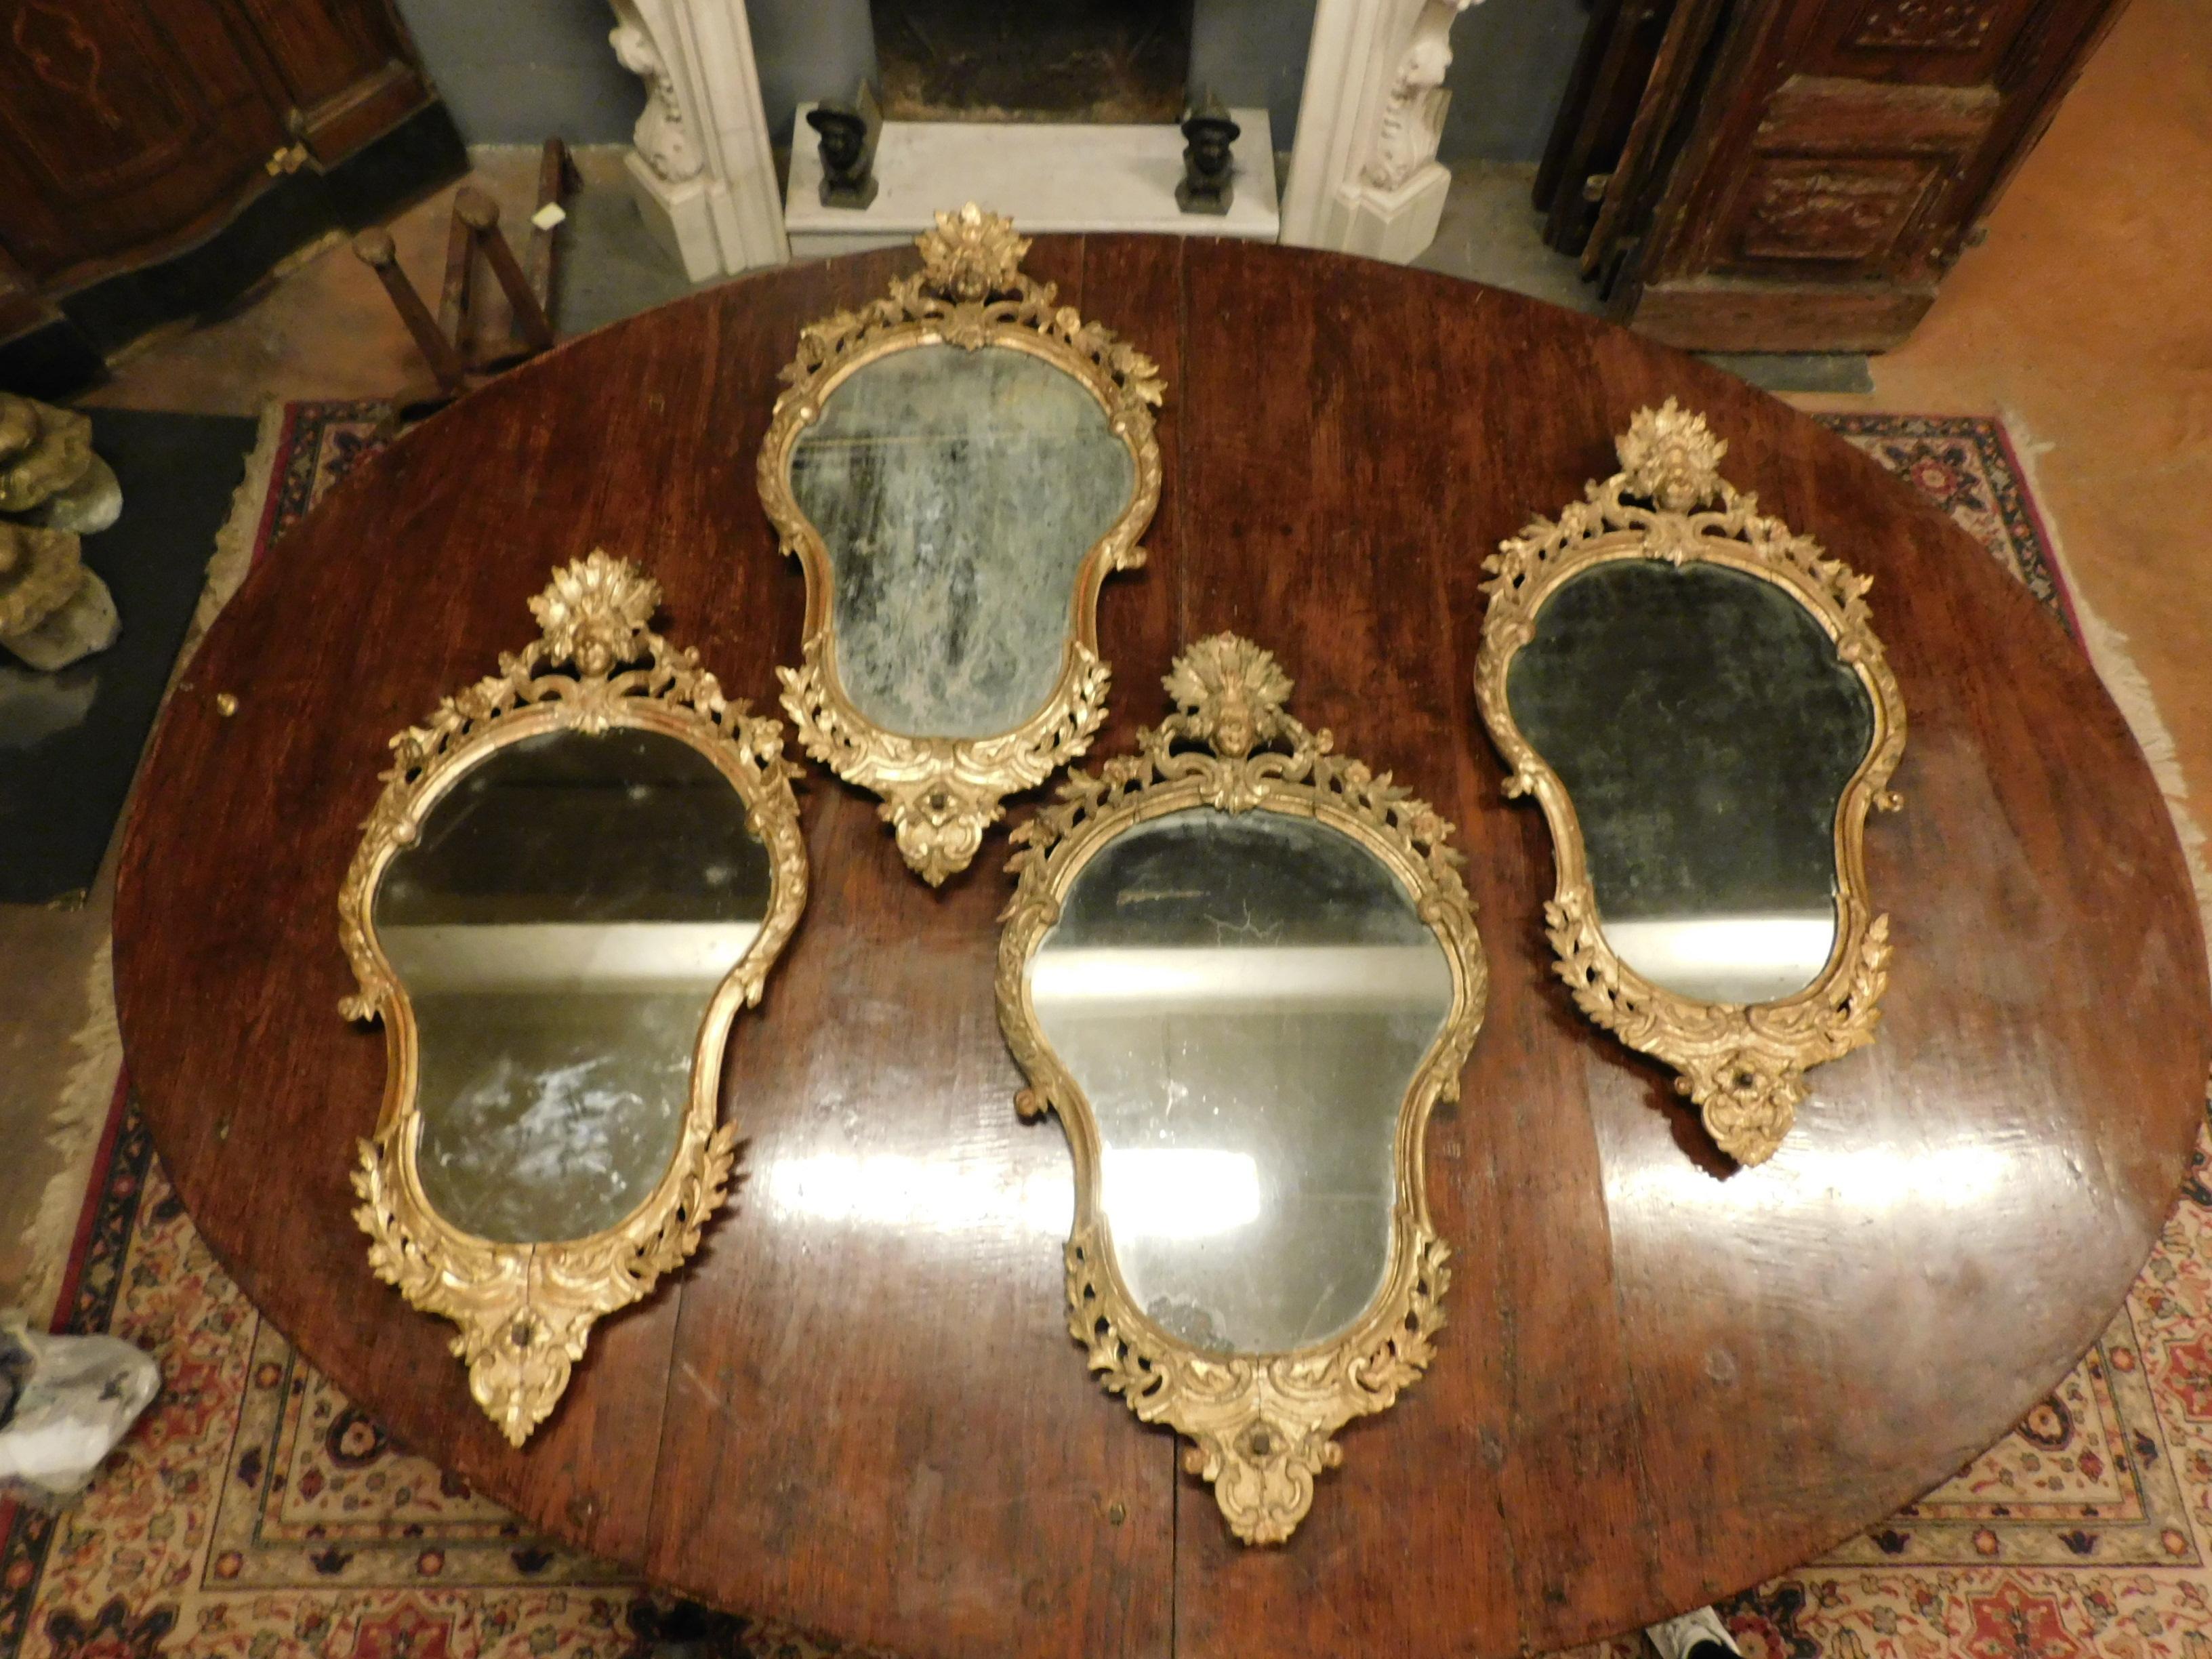 Antique and beautiful Set of 4 fan-shaped mirrors with richly carved and gilded solid wood frame, built in the 18th century for an important noble castle in Italy.
Stunning and of great value, extraordinary recovery in this quantity and of this